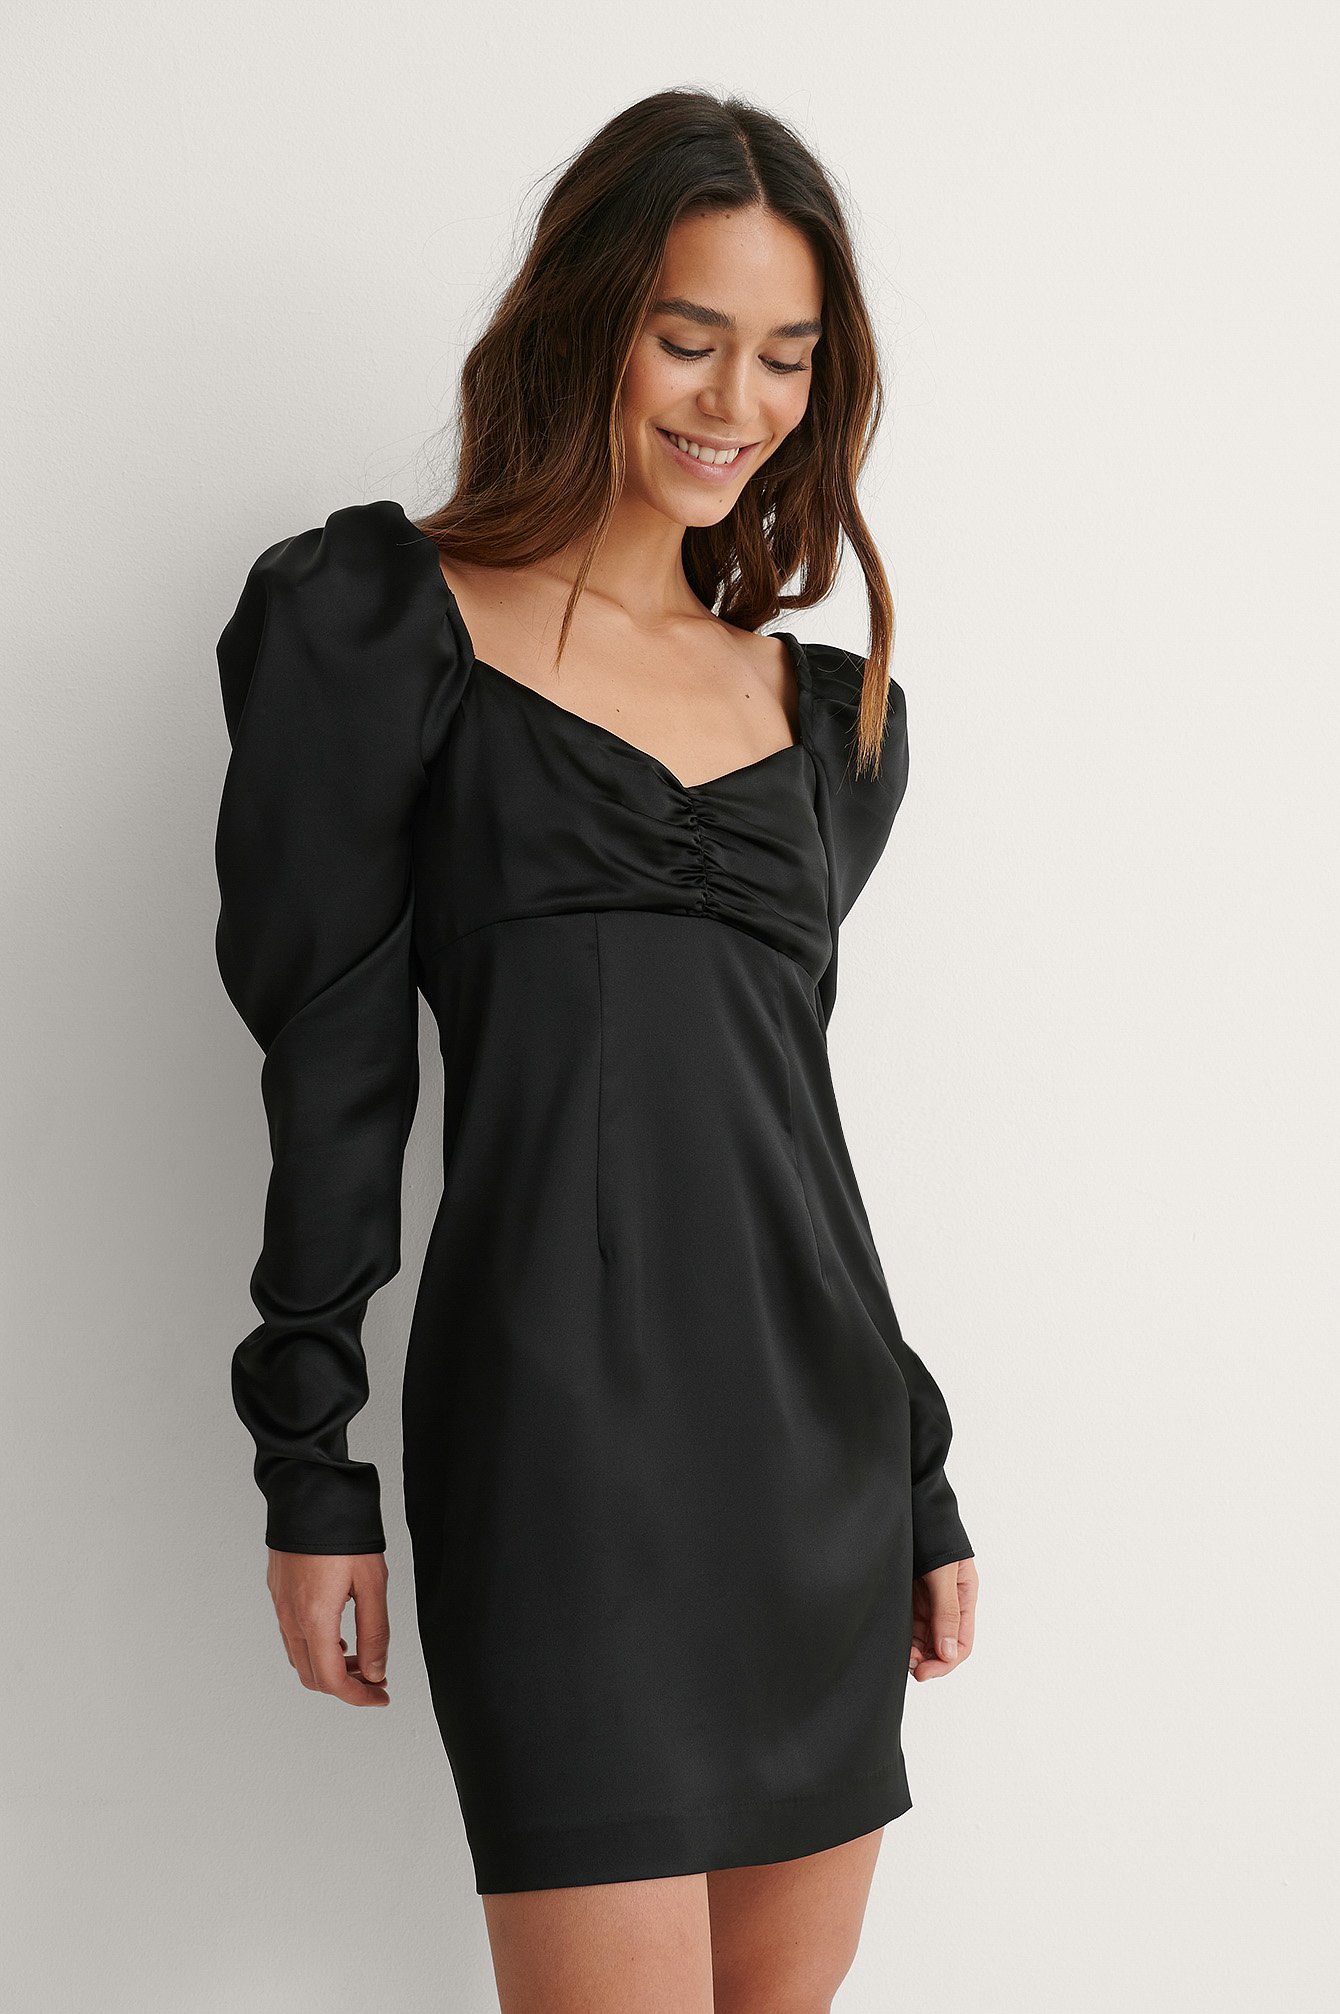 Puffy Sleeve Detail Dress Outfit!